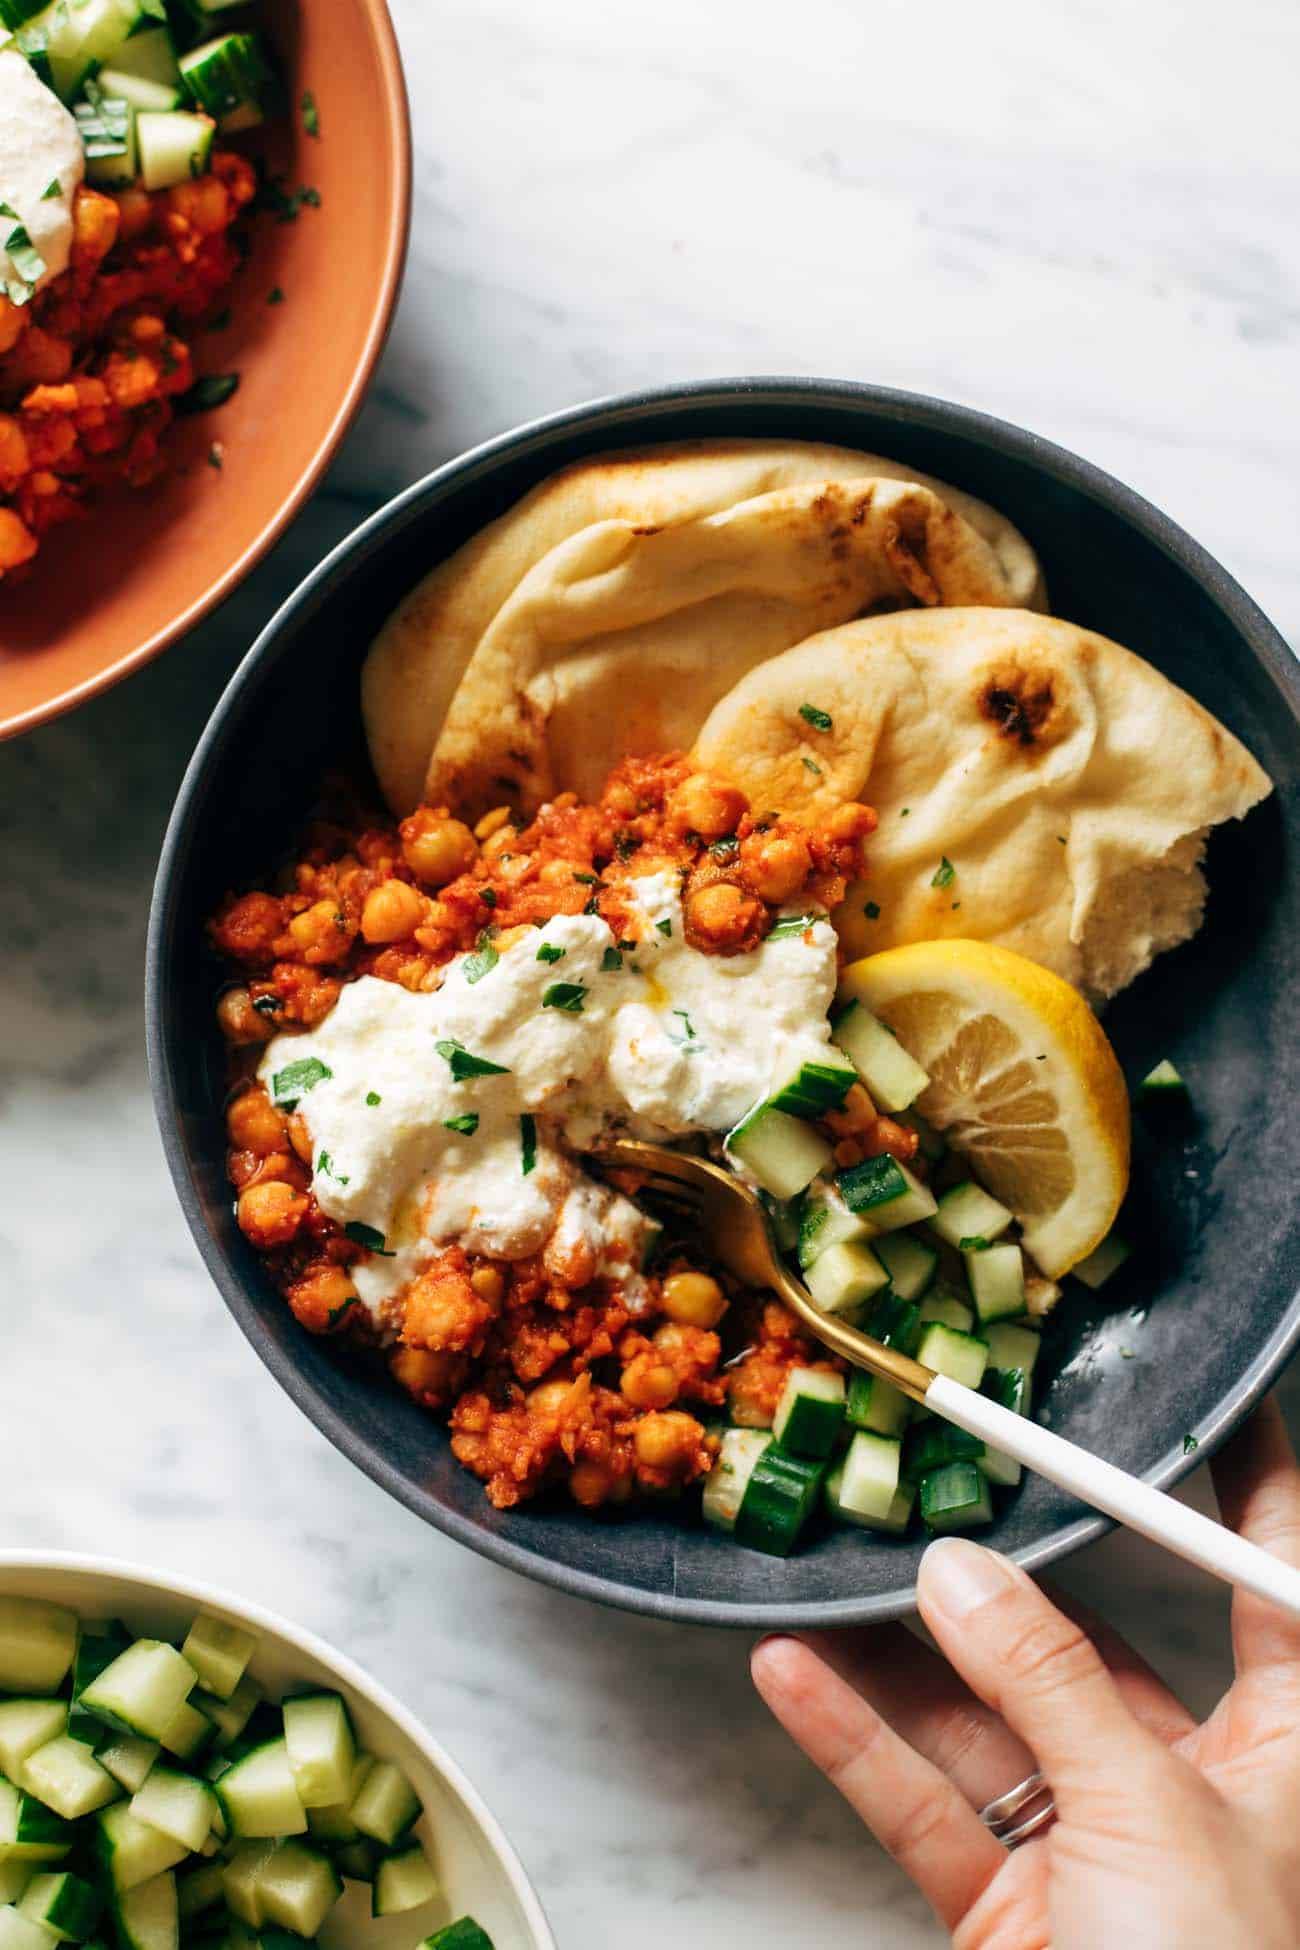 Harissa chickpeas with whipped feta in a bowl with cucumbers, lemon, and naan. 